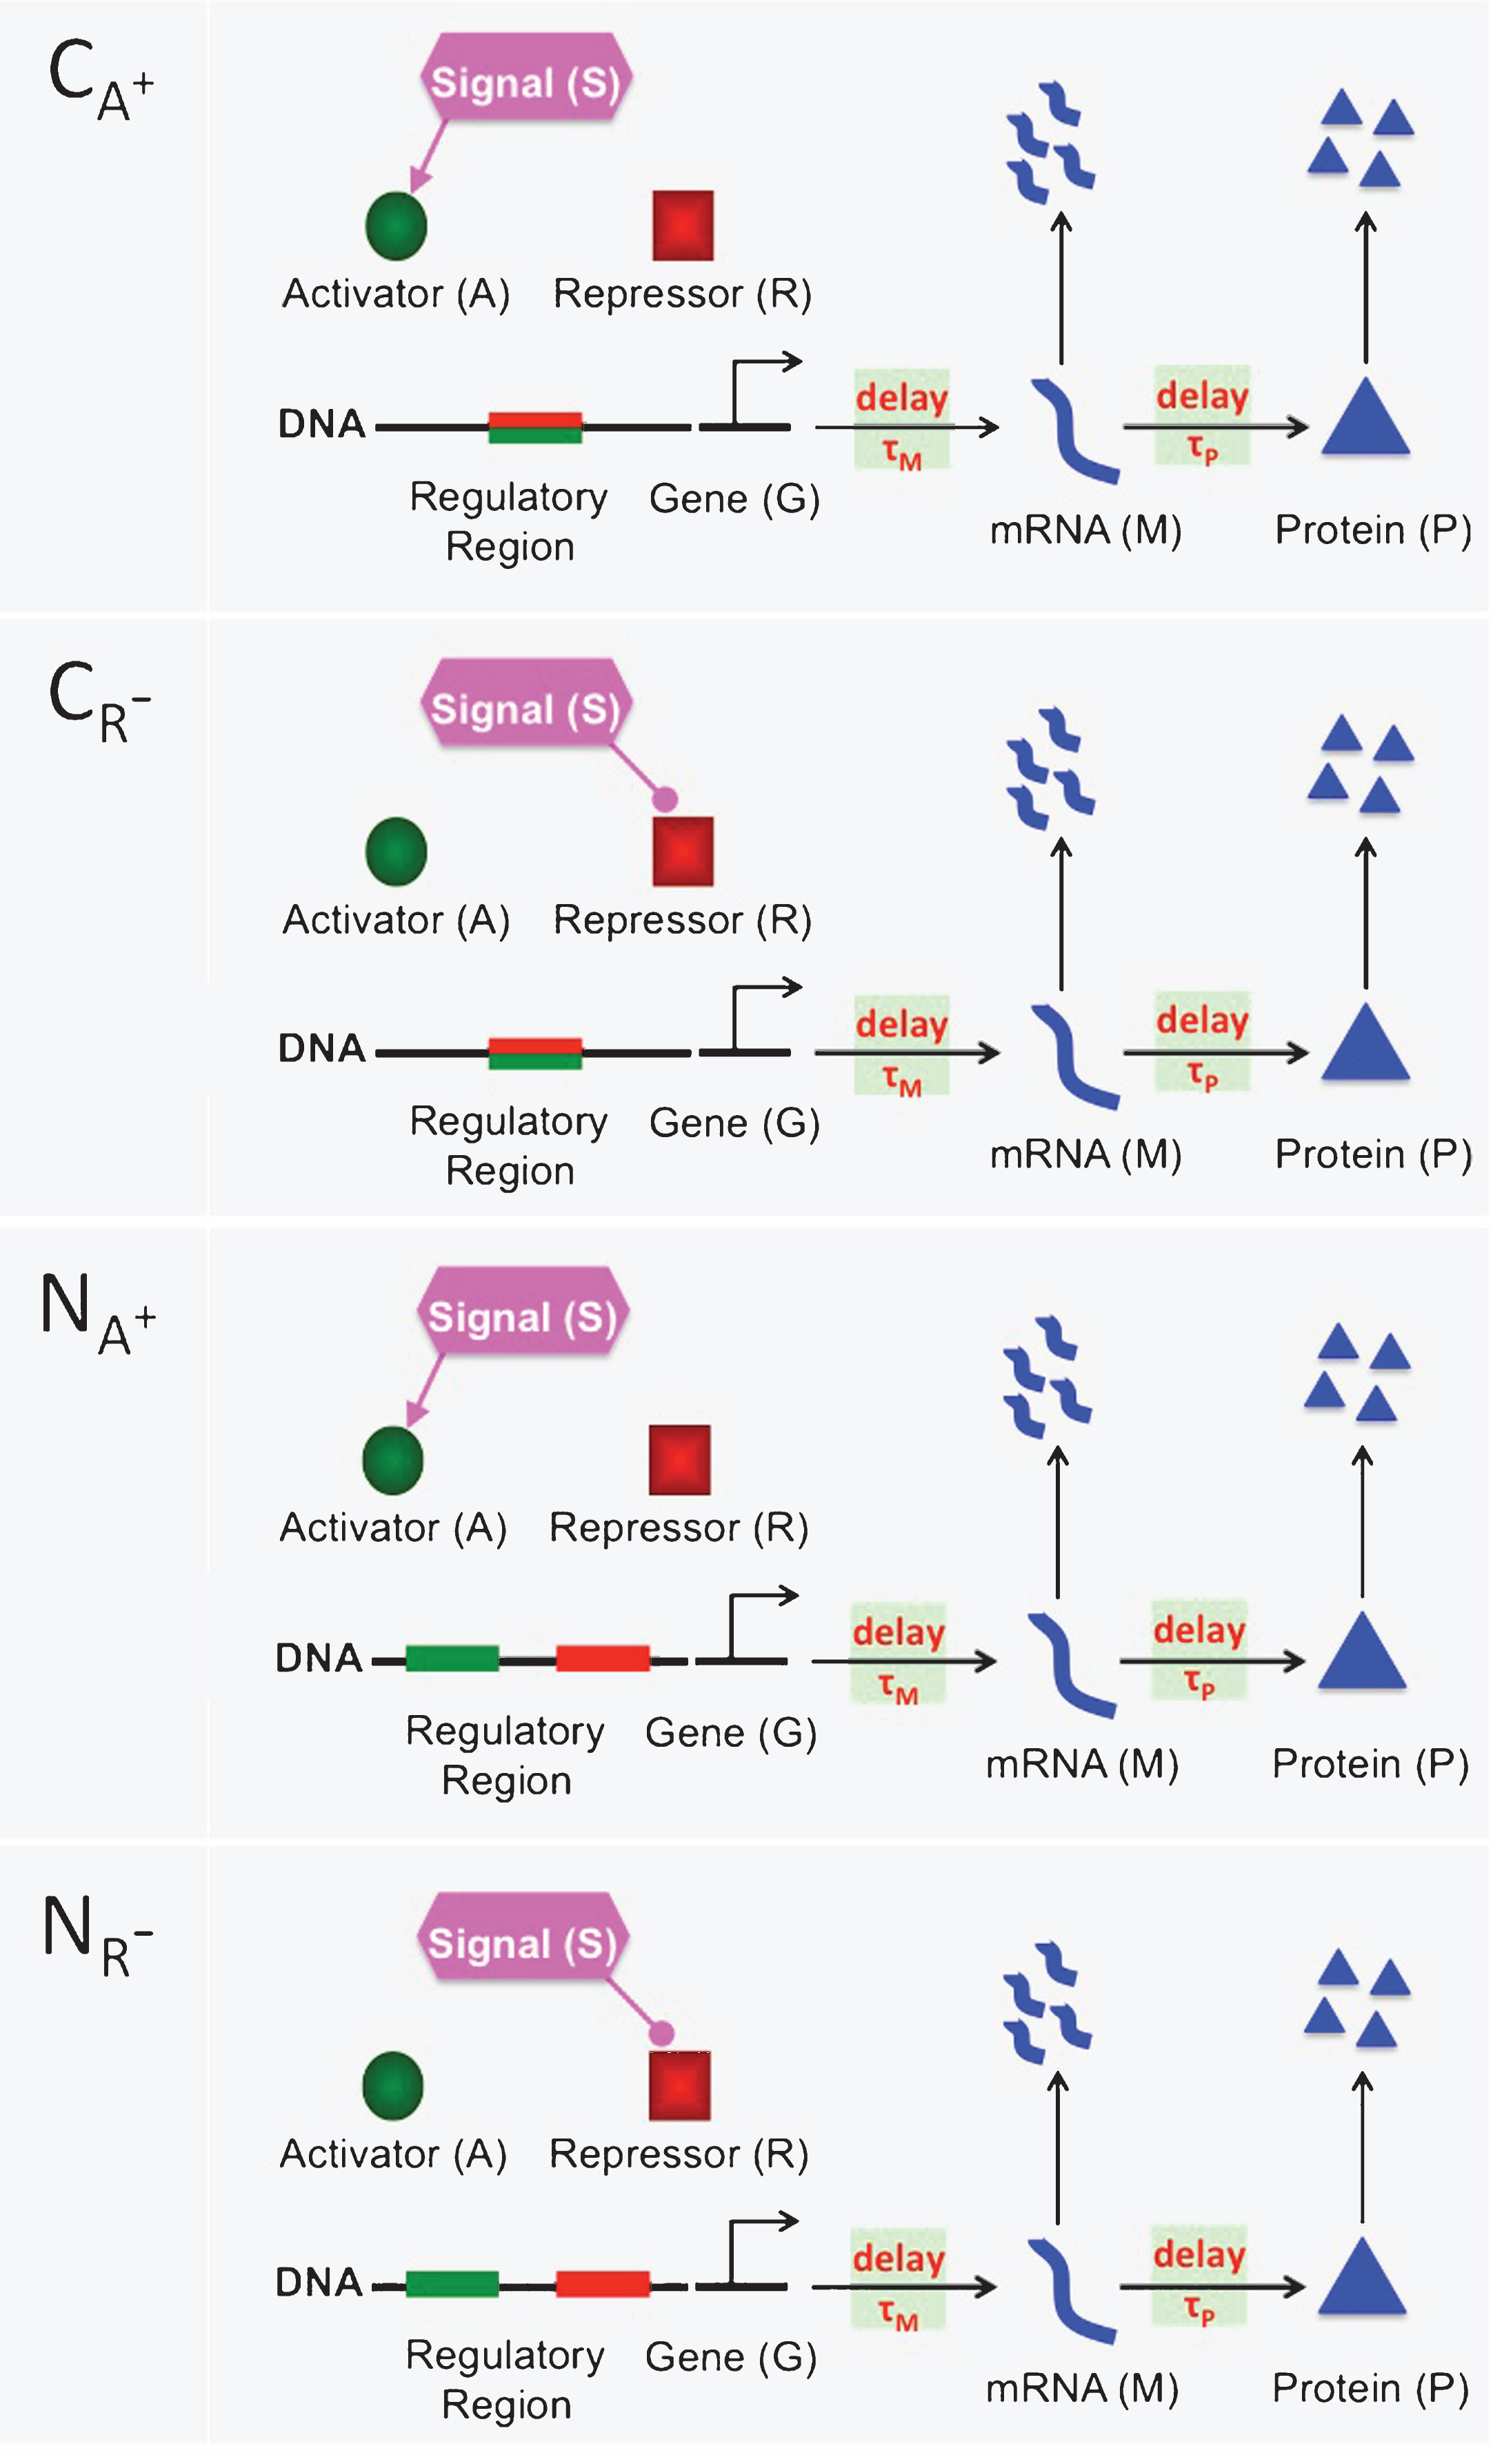 A cartoon showing four different activation mechanisms CA+, CR−, NA+ and NR−. In the competitive mechanisms (CA+ and CR−), the activator protein (green circle) and the repressor protein (red square) compete to bind to the same regulatory region(green-red rectangle) of DNA. In the noncompetitive mechanism (NA+ and NR−), there are two separate binding sites on the regulatory region, one is for the activator protein (green rectangle) and the other is for the repressor protein (red rectangle). In all figures, the lines coming out of the signal with rounded ends show a decrease in the activator and repressor abundance. Similarly, directed arrows represent an increase in the activator and repressor abundance. The horizontal arrows between gene (G) and mRNA (M) represent transcription process, which can be downregulated by the repressor protein and upregulated by the activator protein. The horizontal arrows between mRNA (M) and Protein (P) denote the translation of mRNA to protein. Finally, the vertical arrows represent degradation of mRNA and protein. Here, τM and τP are for the transcriptional and translational time delays, respectively.